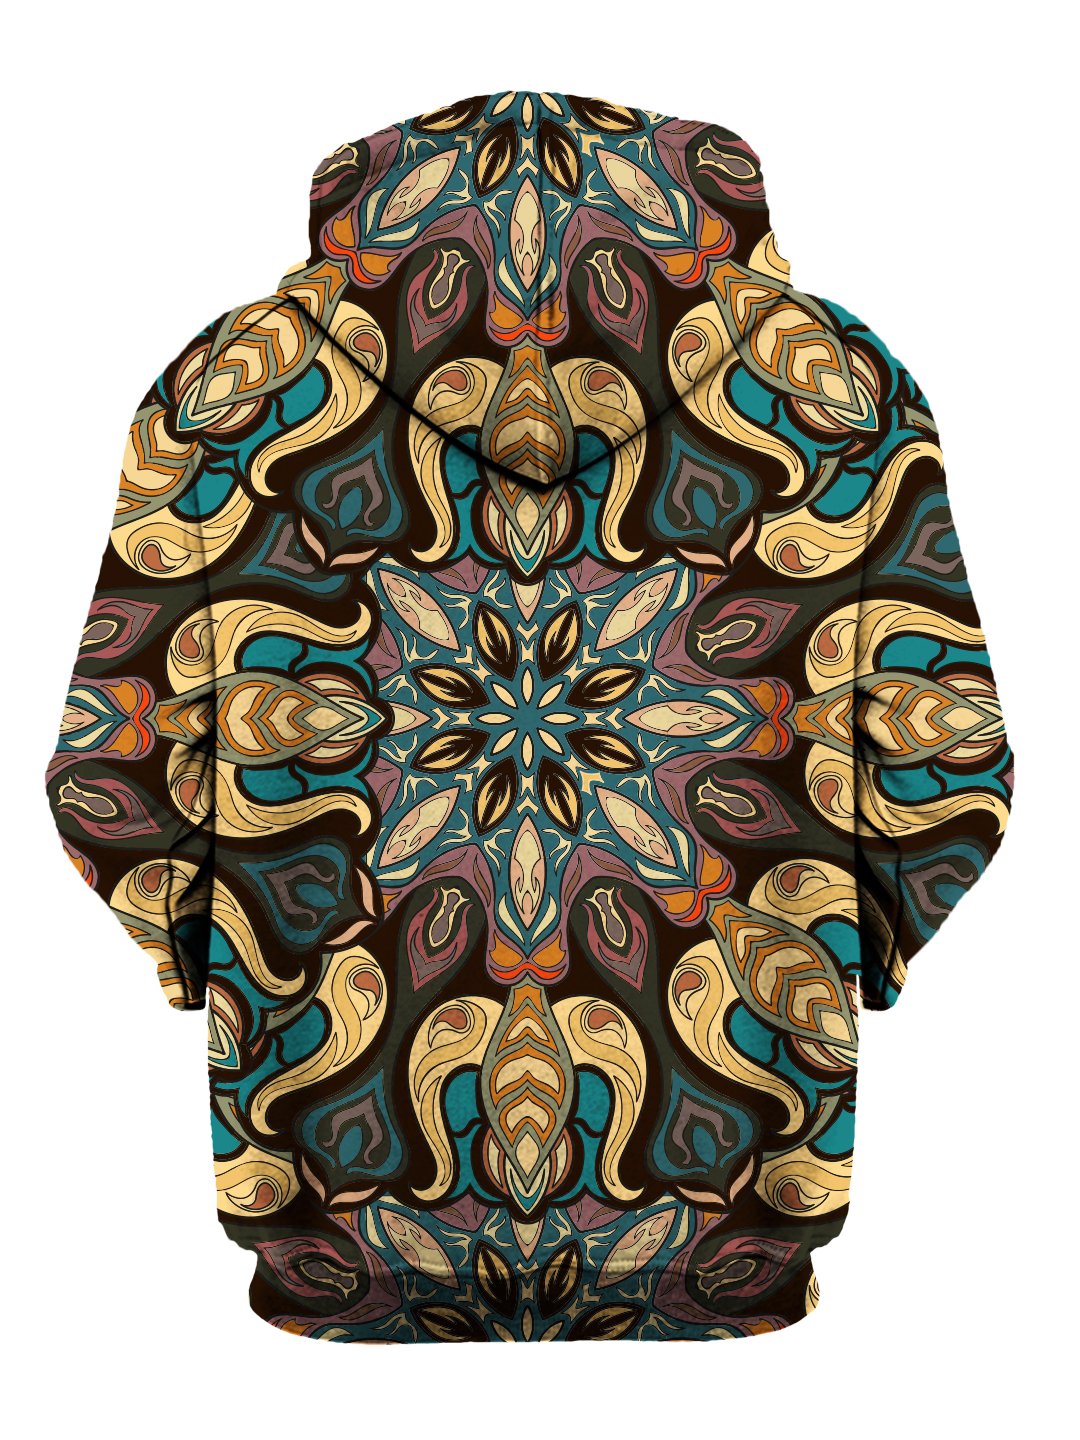 Back view of all over print psychedelic sacred geometry hoody. 